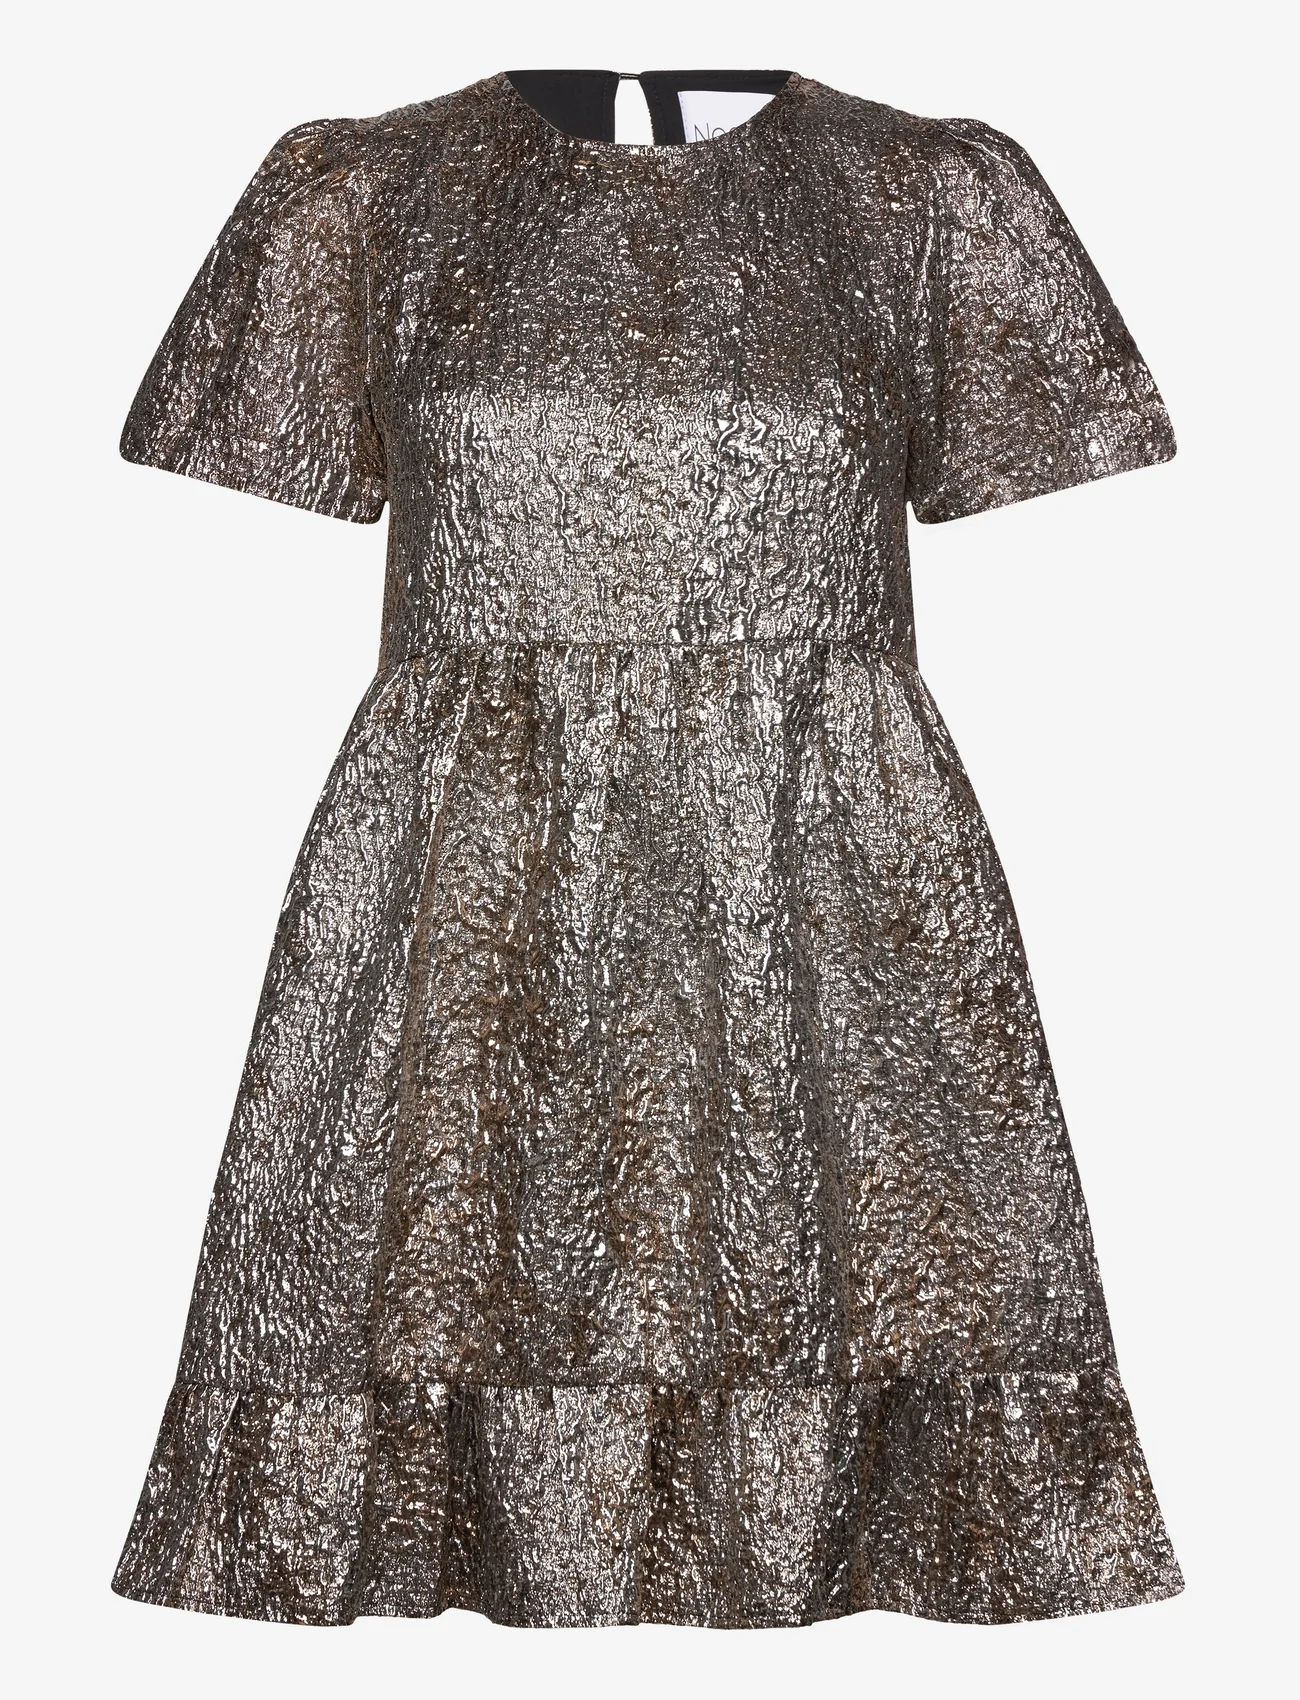 Noella - Maine Taylor Dress - peoriided outlet-hindadega - silver/gold mix - 0